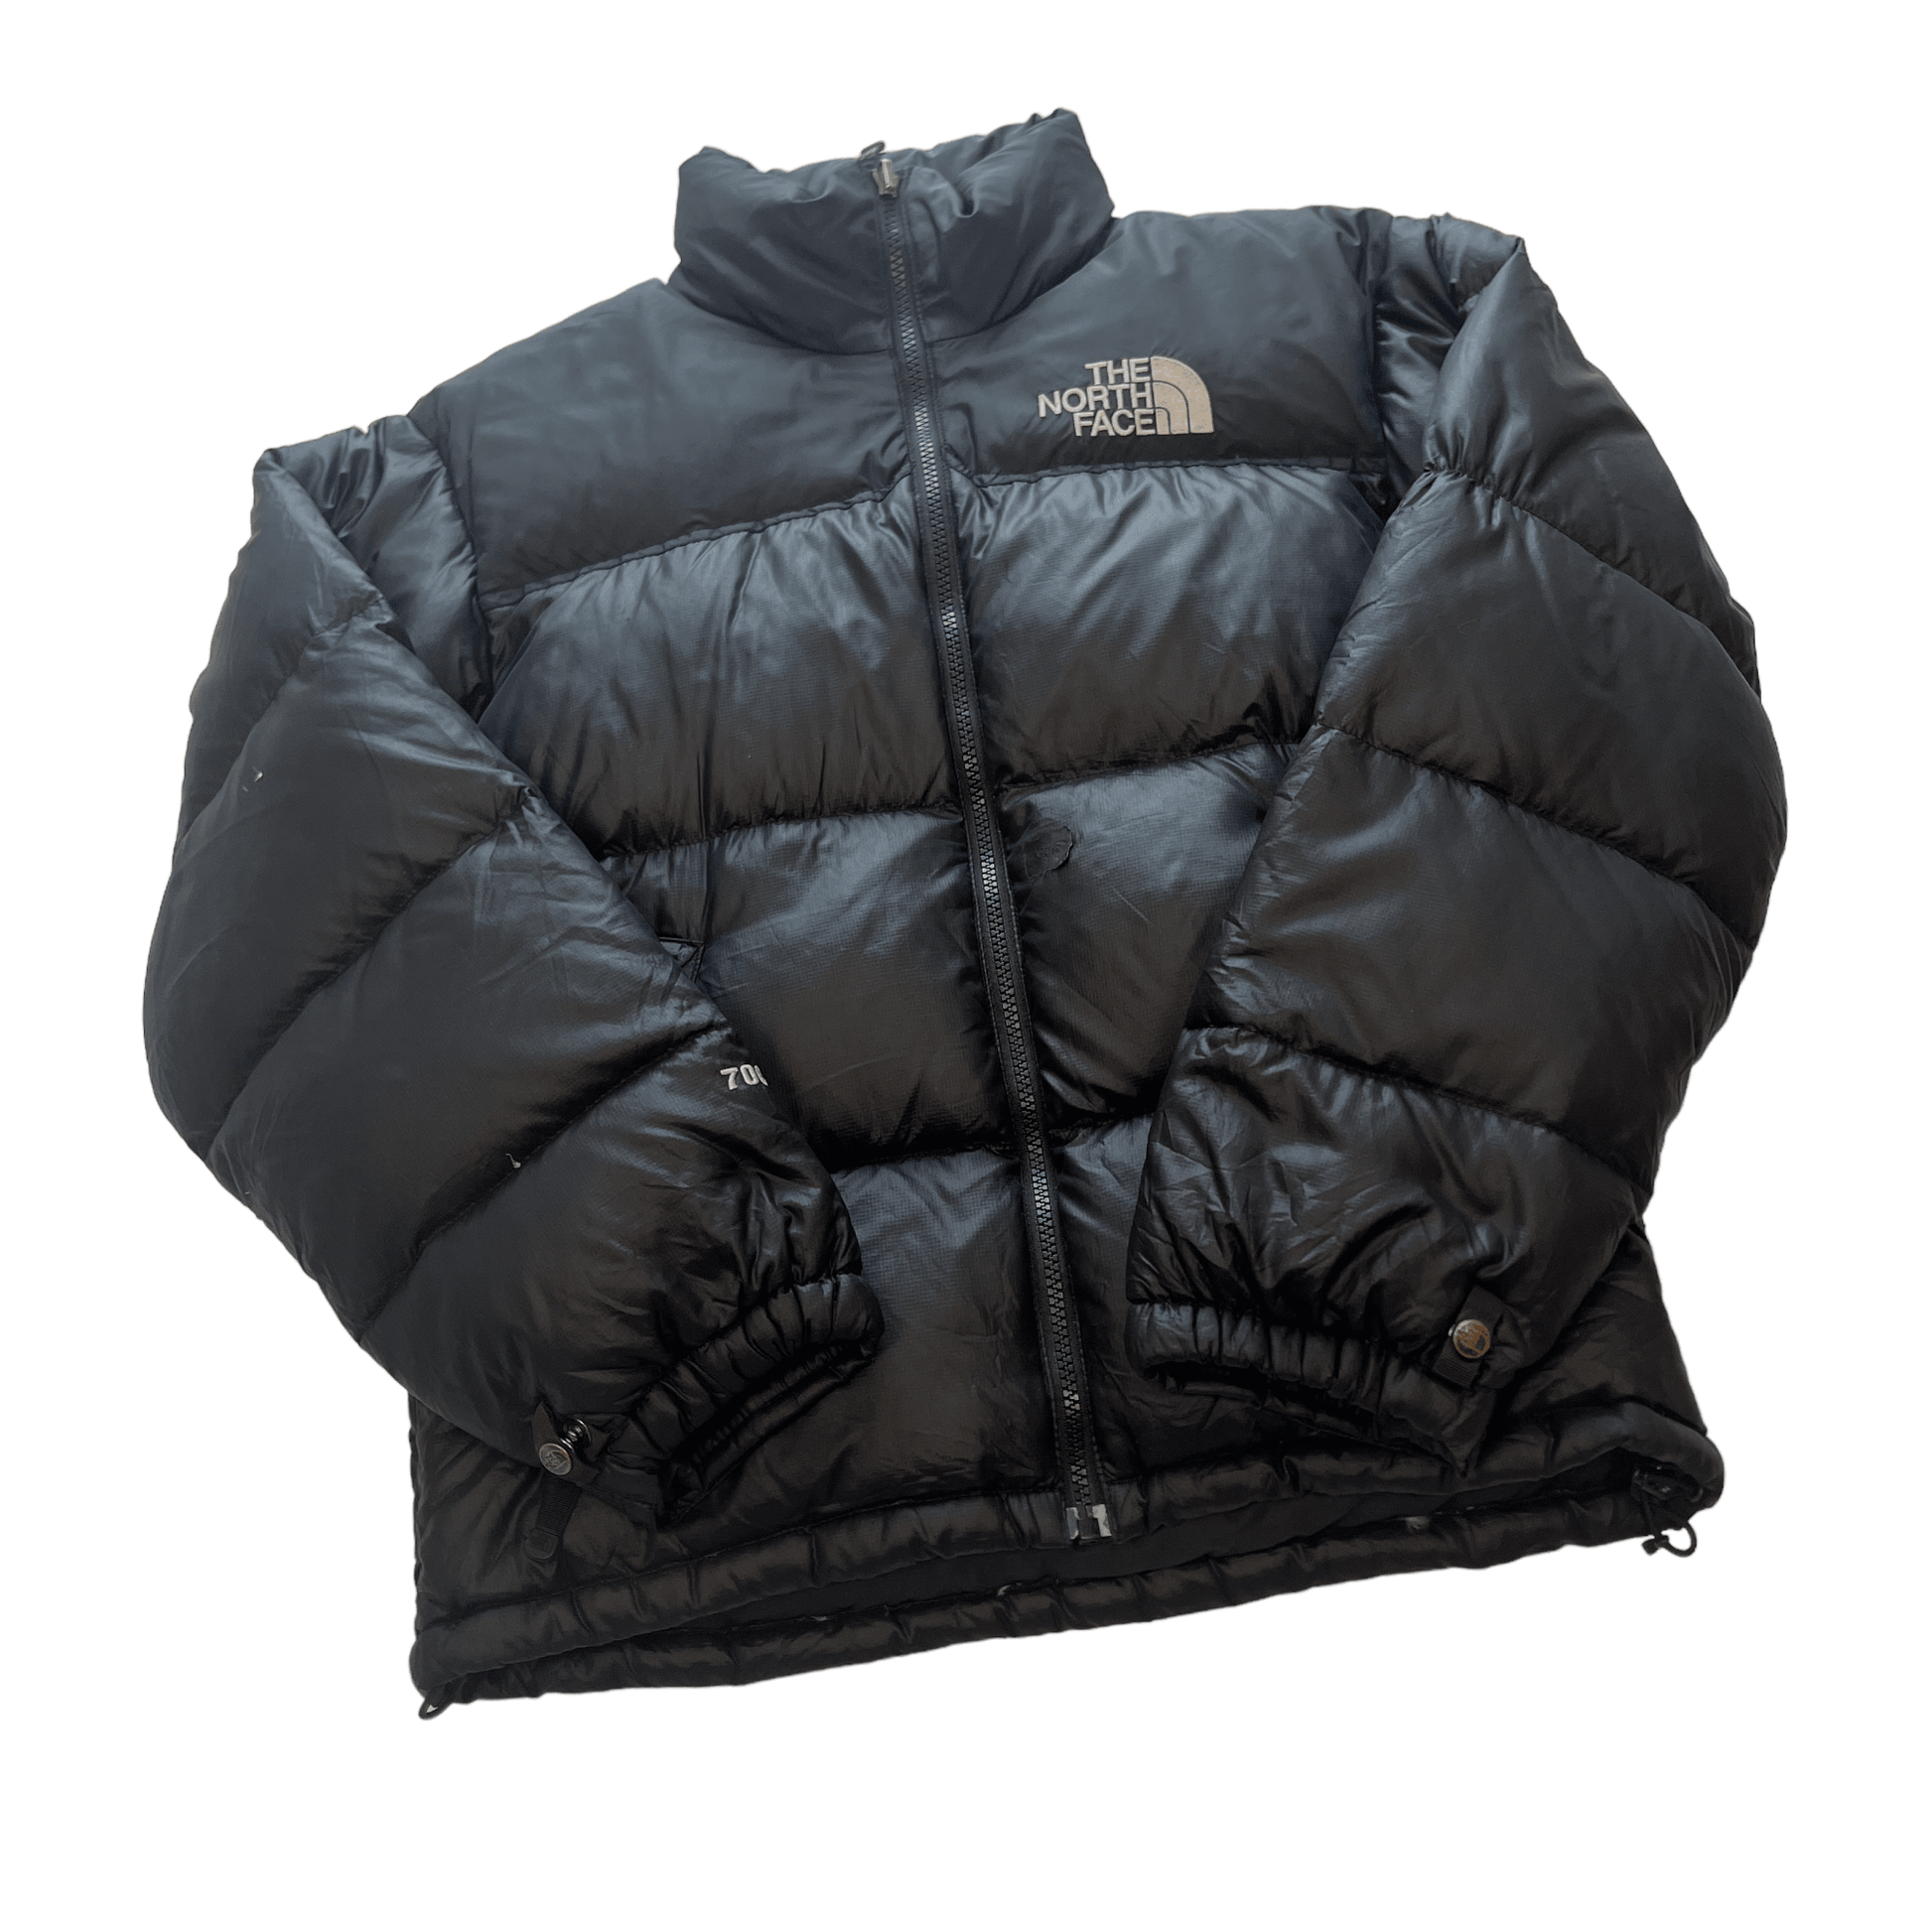 Vintage Black The North Face (TNF) Puffer Coat - Small - The Streetwear Studio